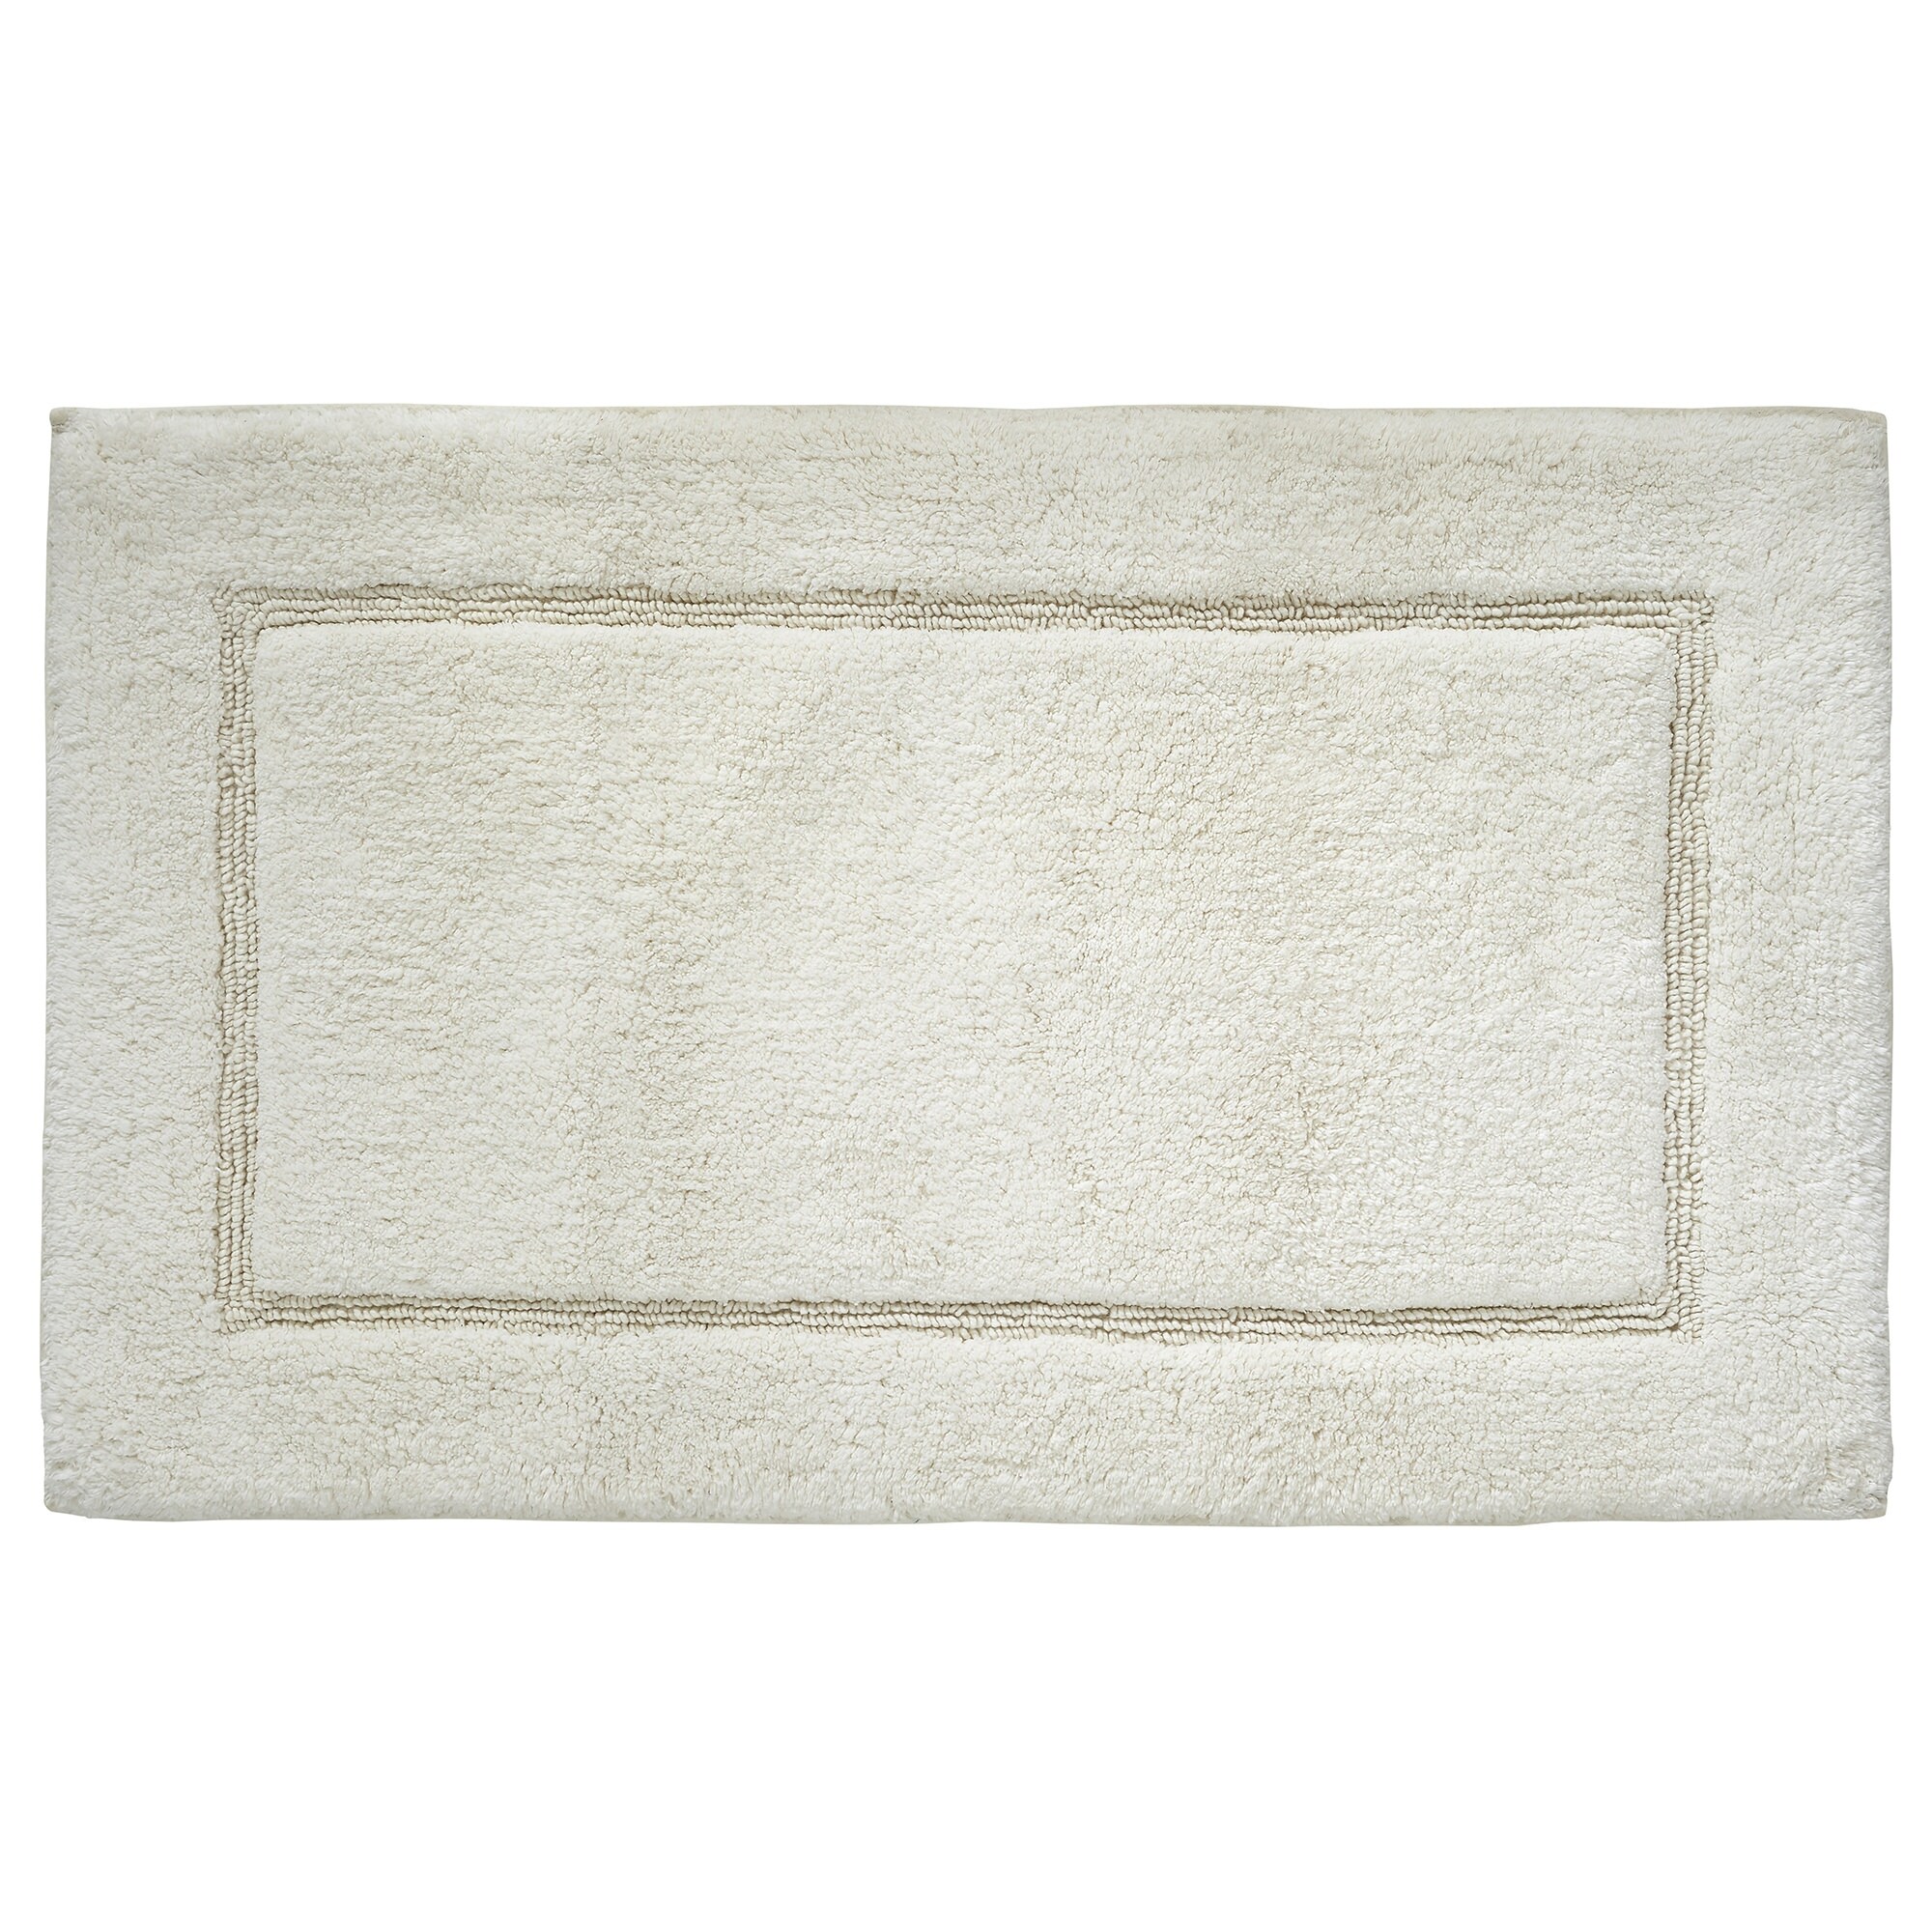 MODERN THREADS Ivory 2-Pack Solid Loop with Non-Slip Backing Bath